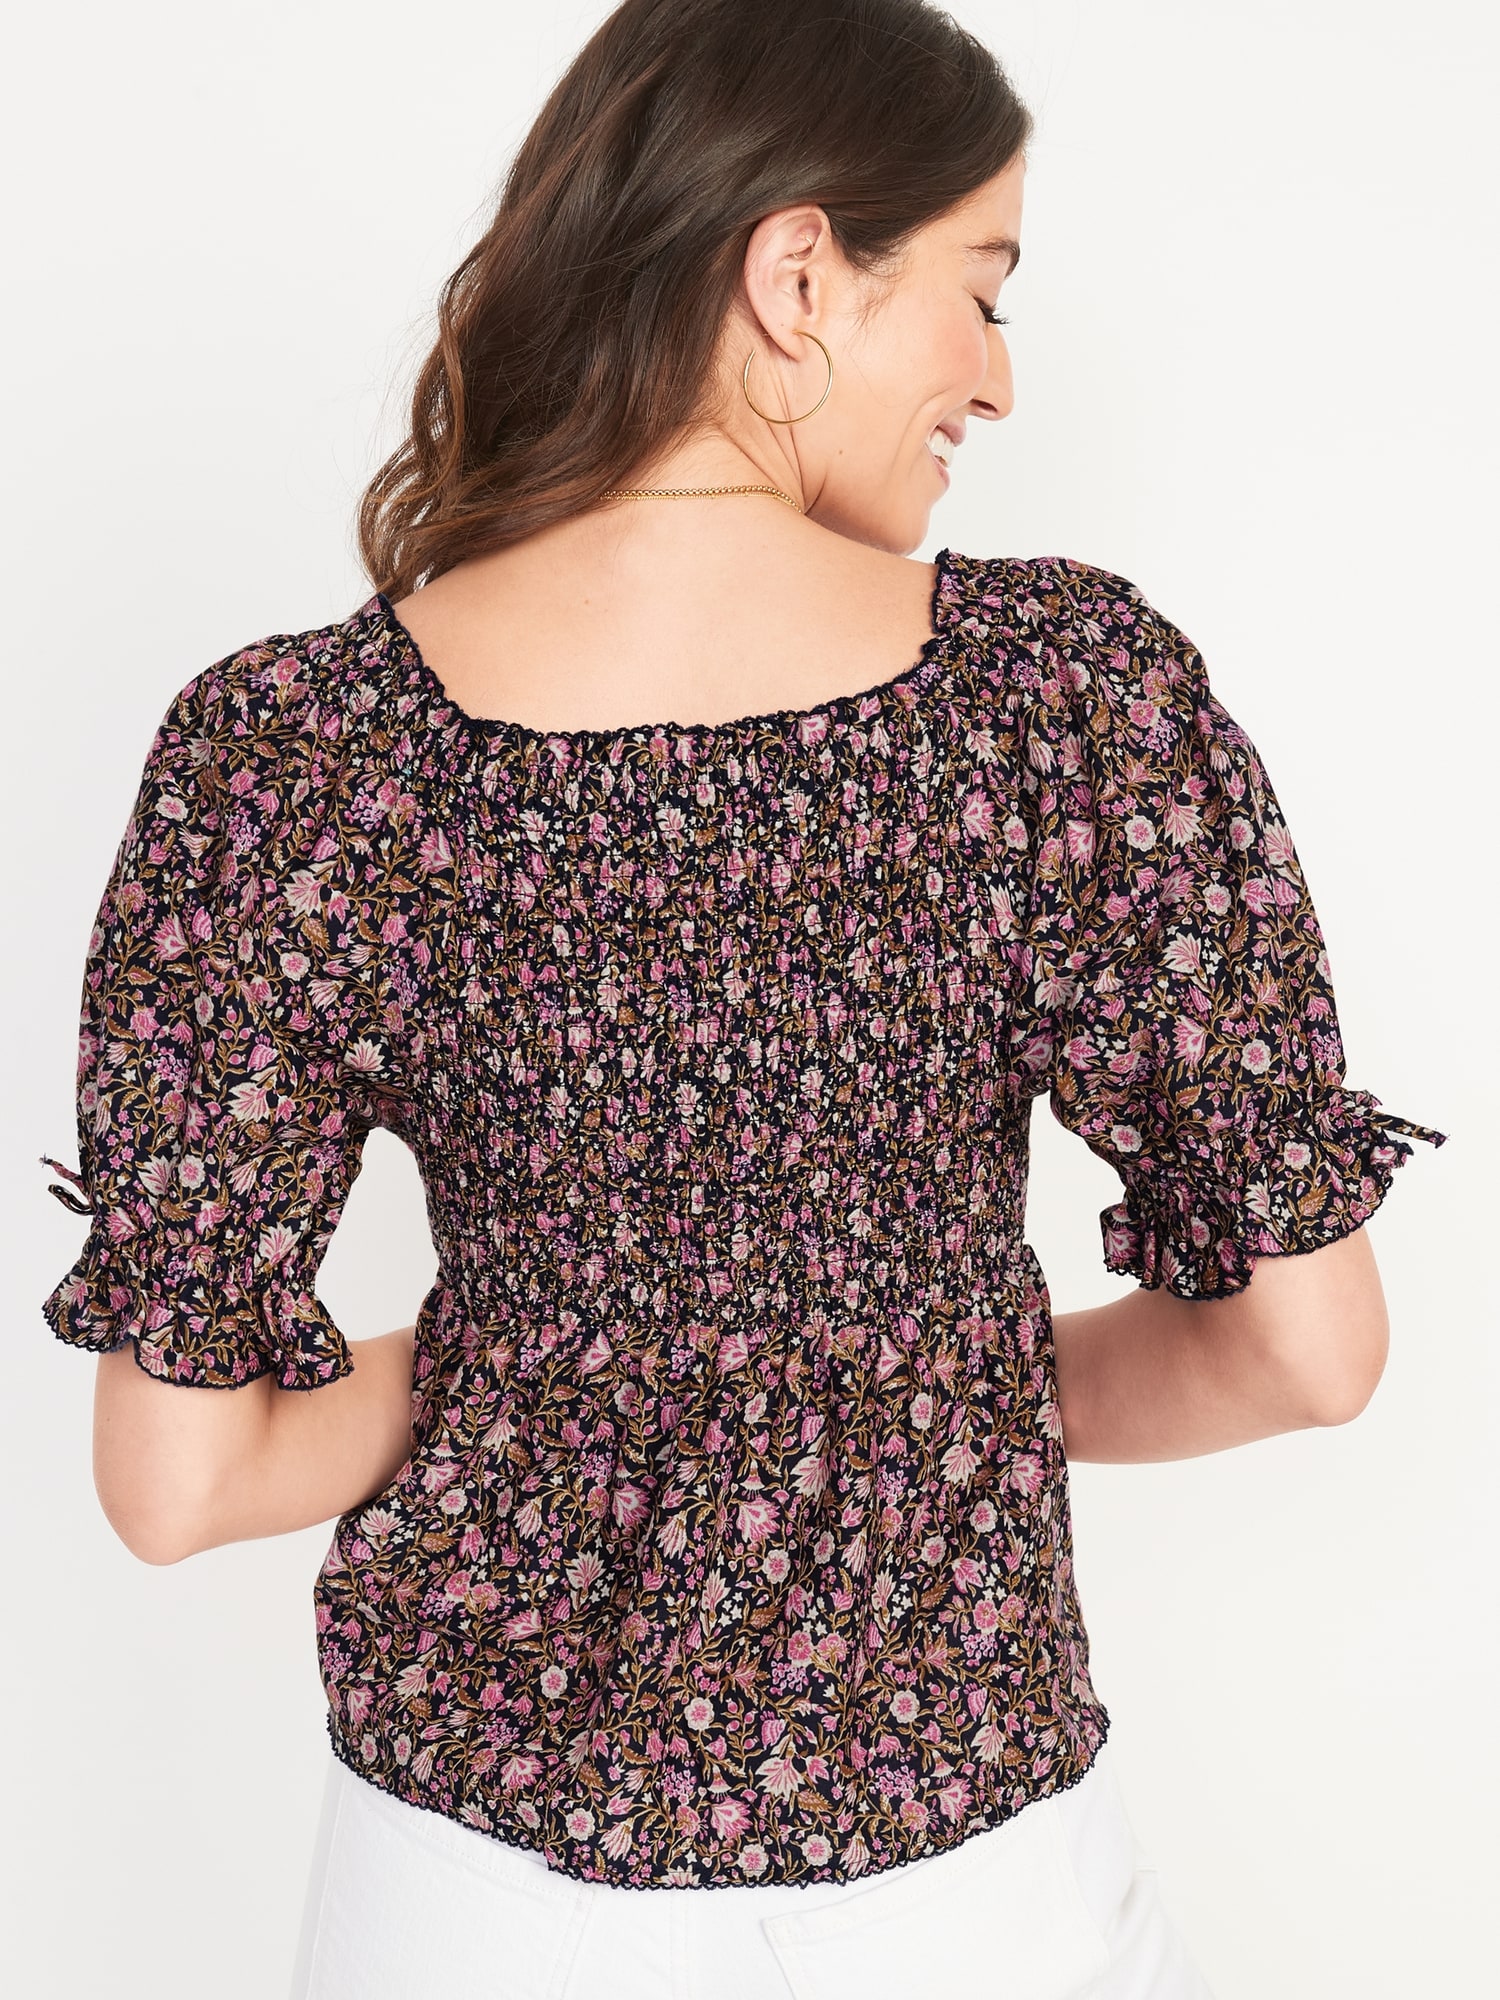 Cotton:On long sleeve babydoll blouse in ditsy floral